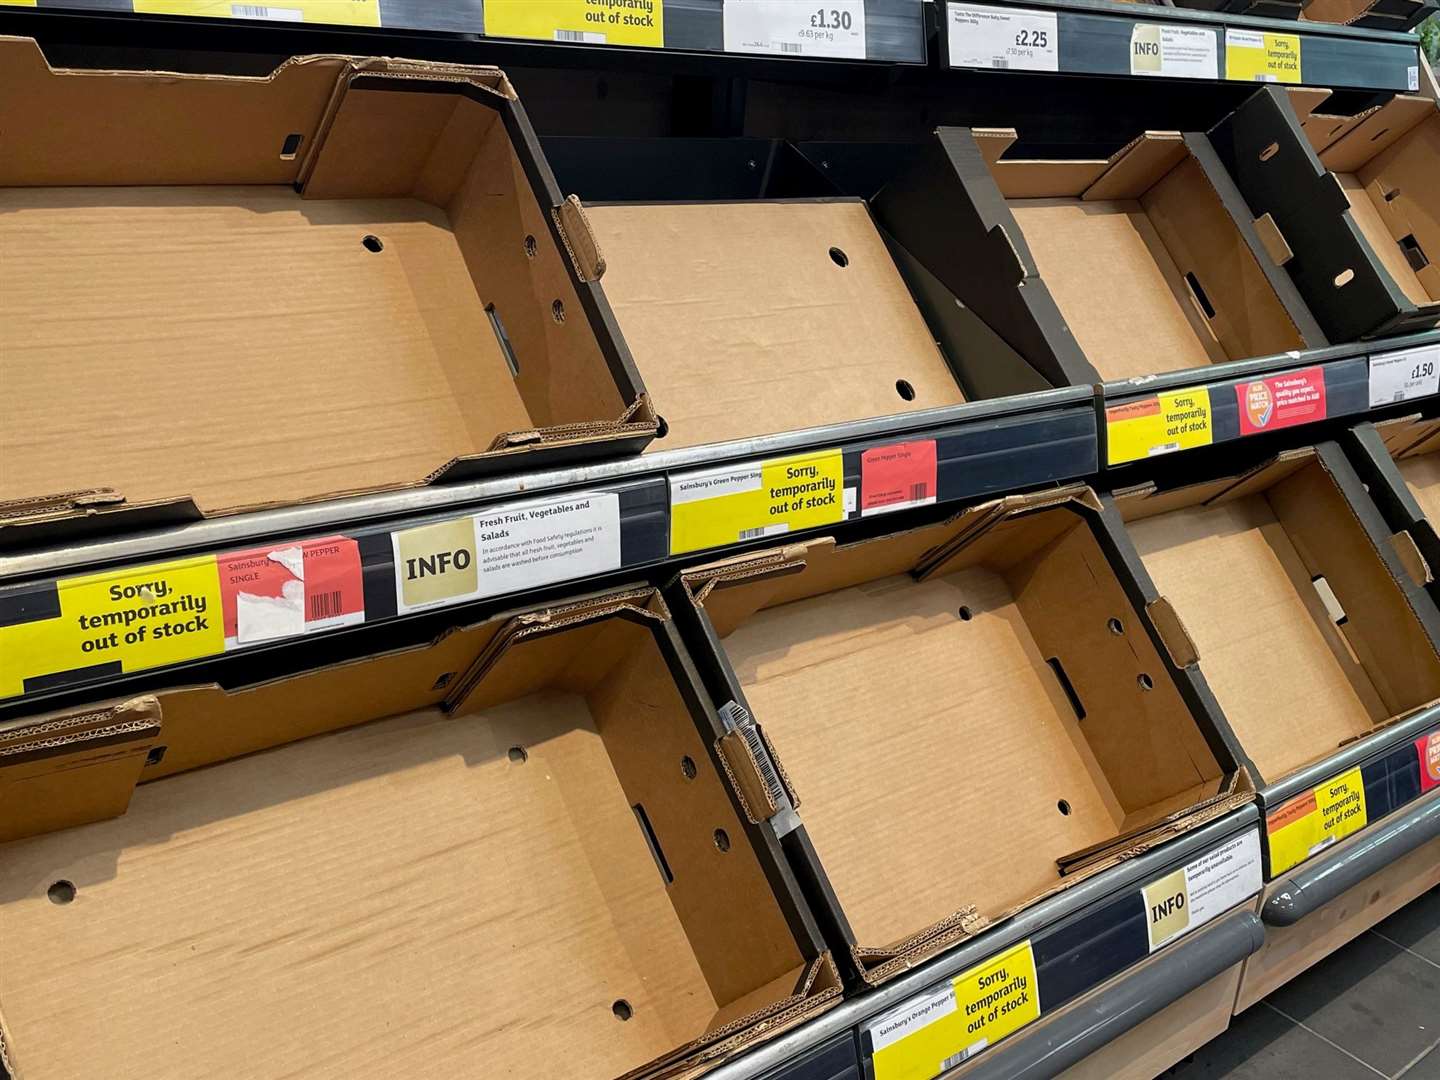 Shelves were empty in February and March when there were shortages of salad and veg.